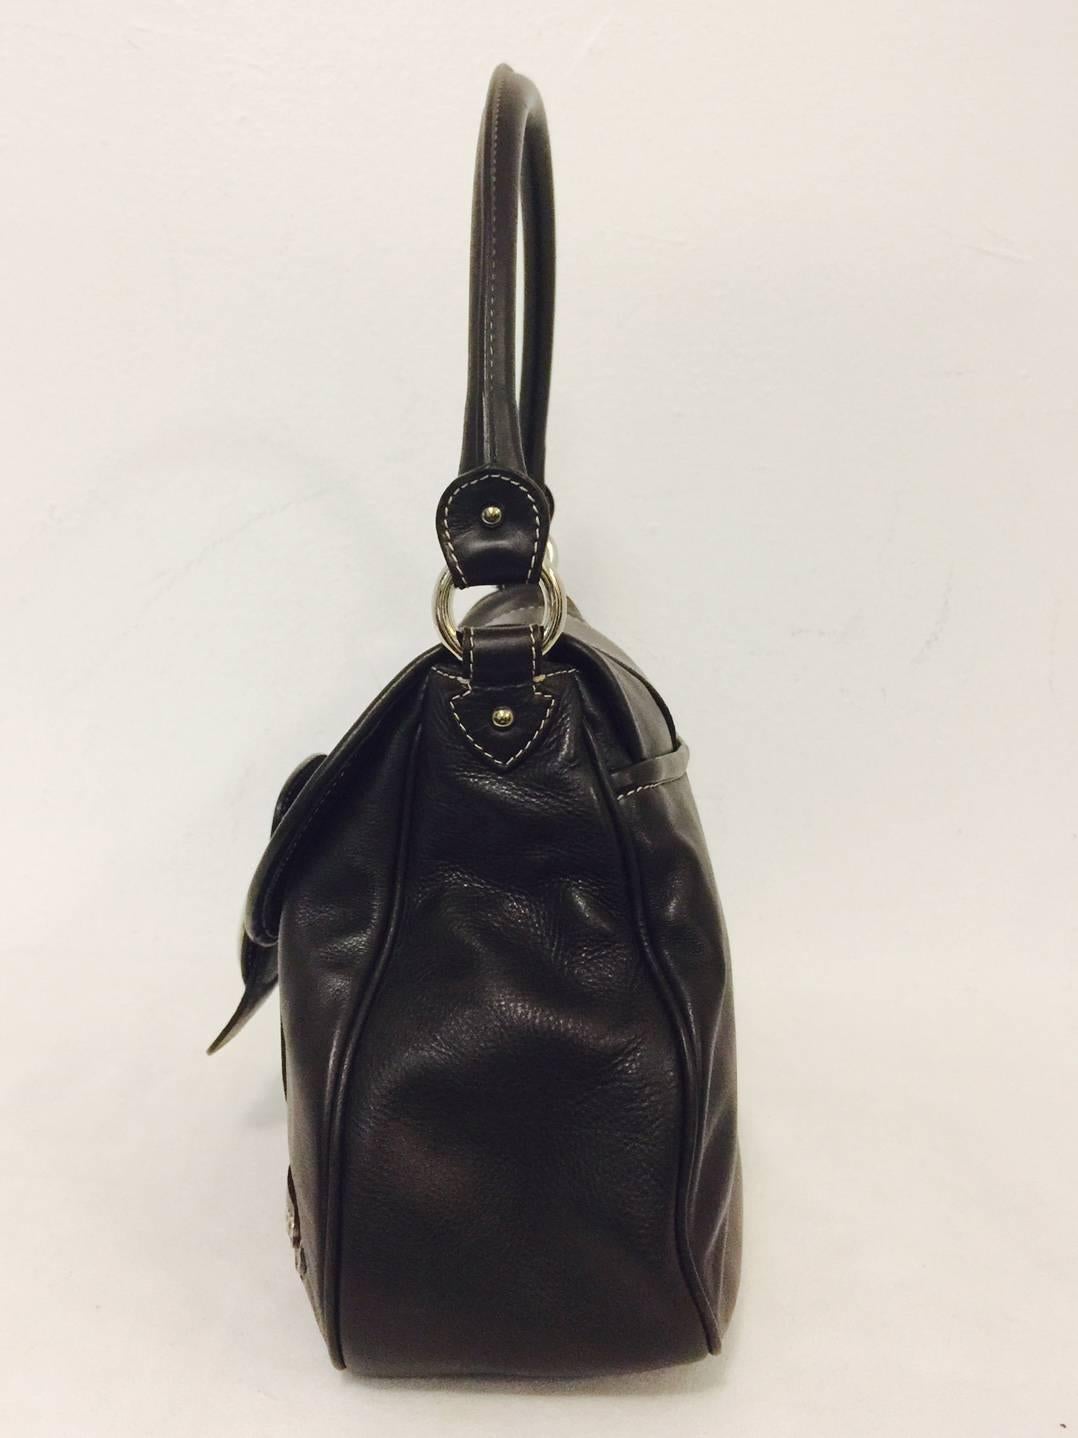 Christian Dior Chocolate Leather Flap Shoulder Bag With Silver Tone Hardware  In Excellent Condition For Sale In Palm Beach, FL